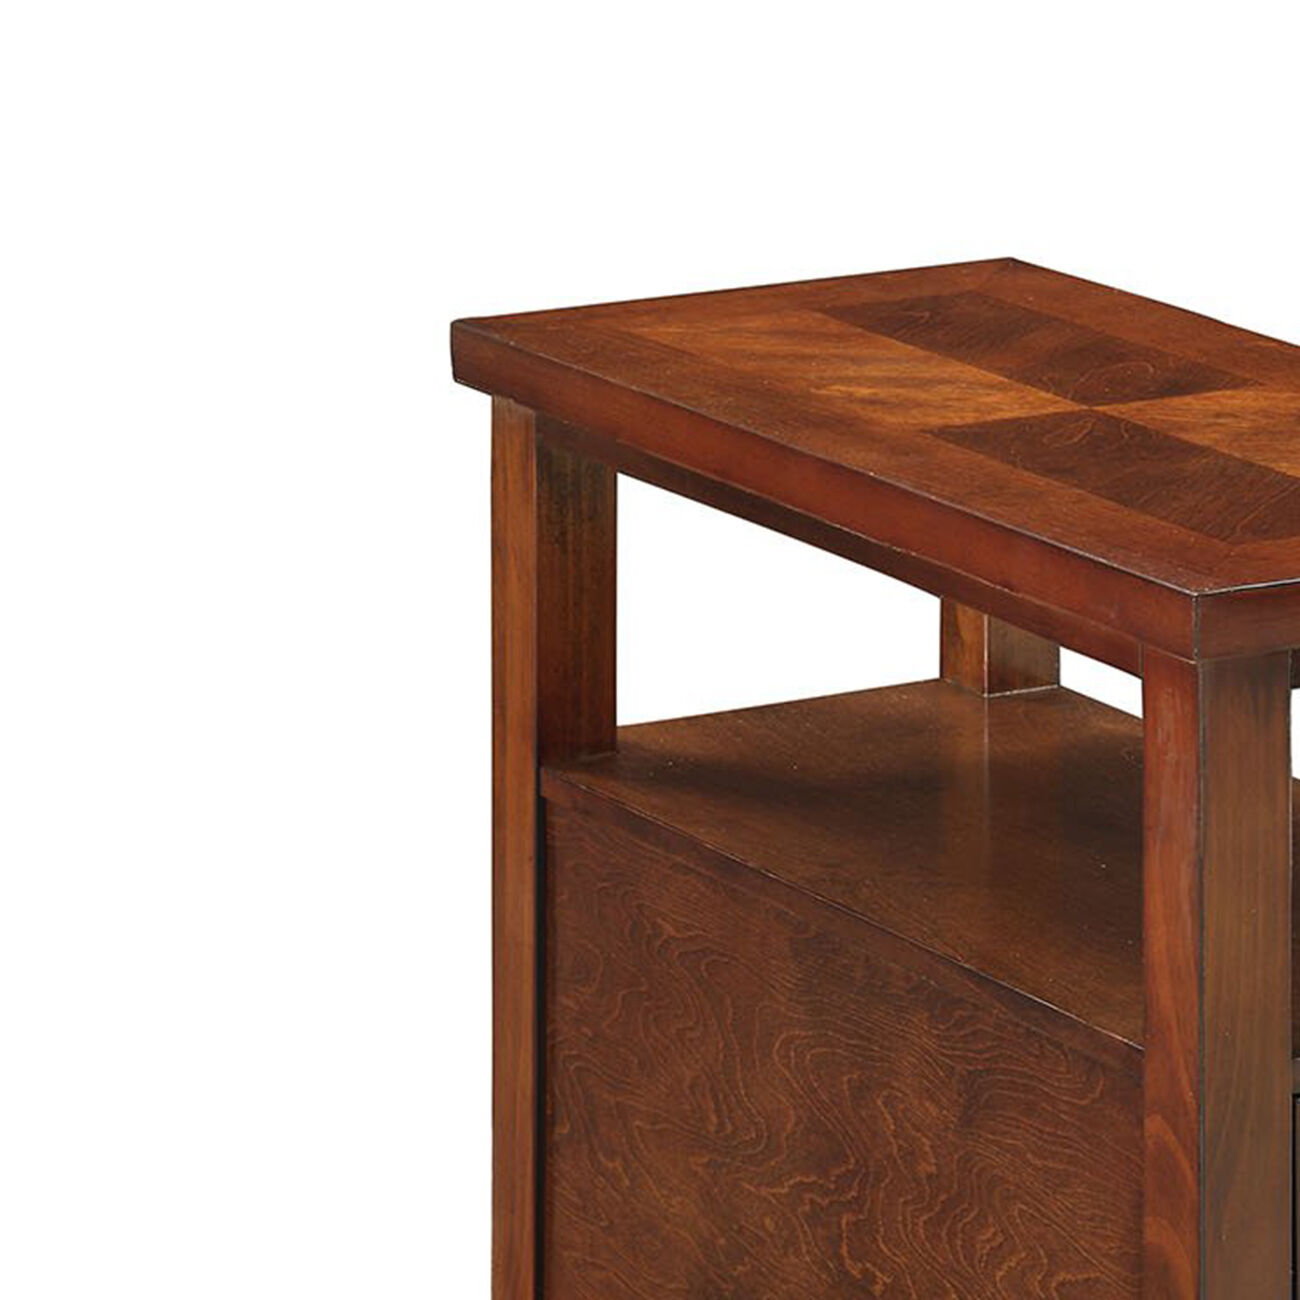 2 Drawer Grained Wooden Frame Side Table, Cherry Brown